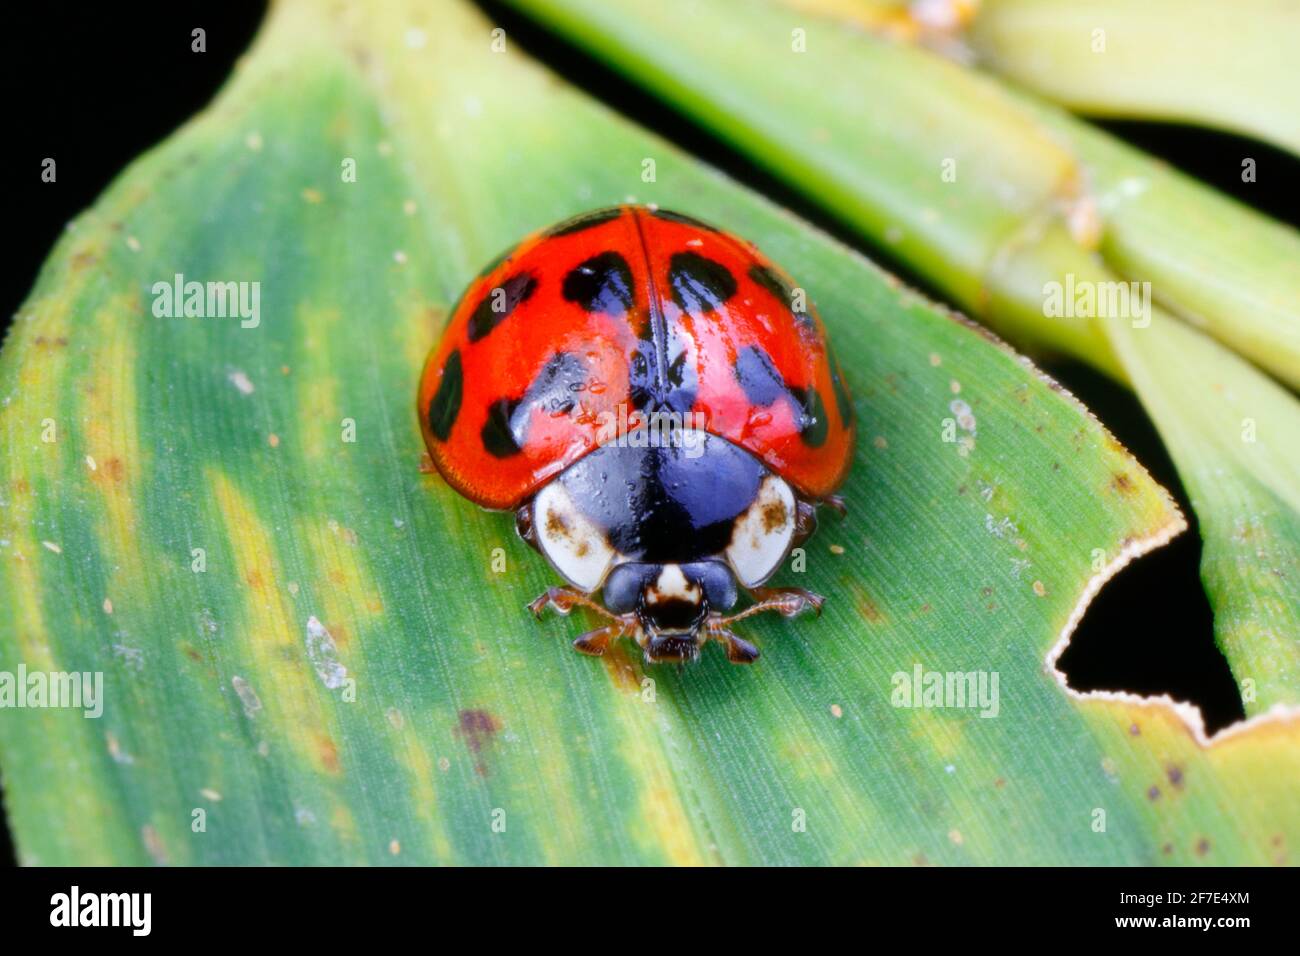 A  frontal photograph of a Chinese ladybug. Stock Photo